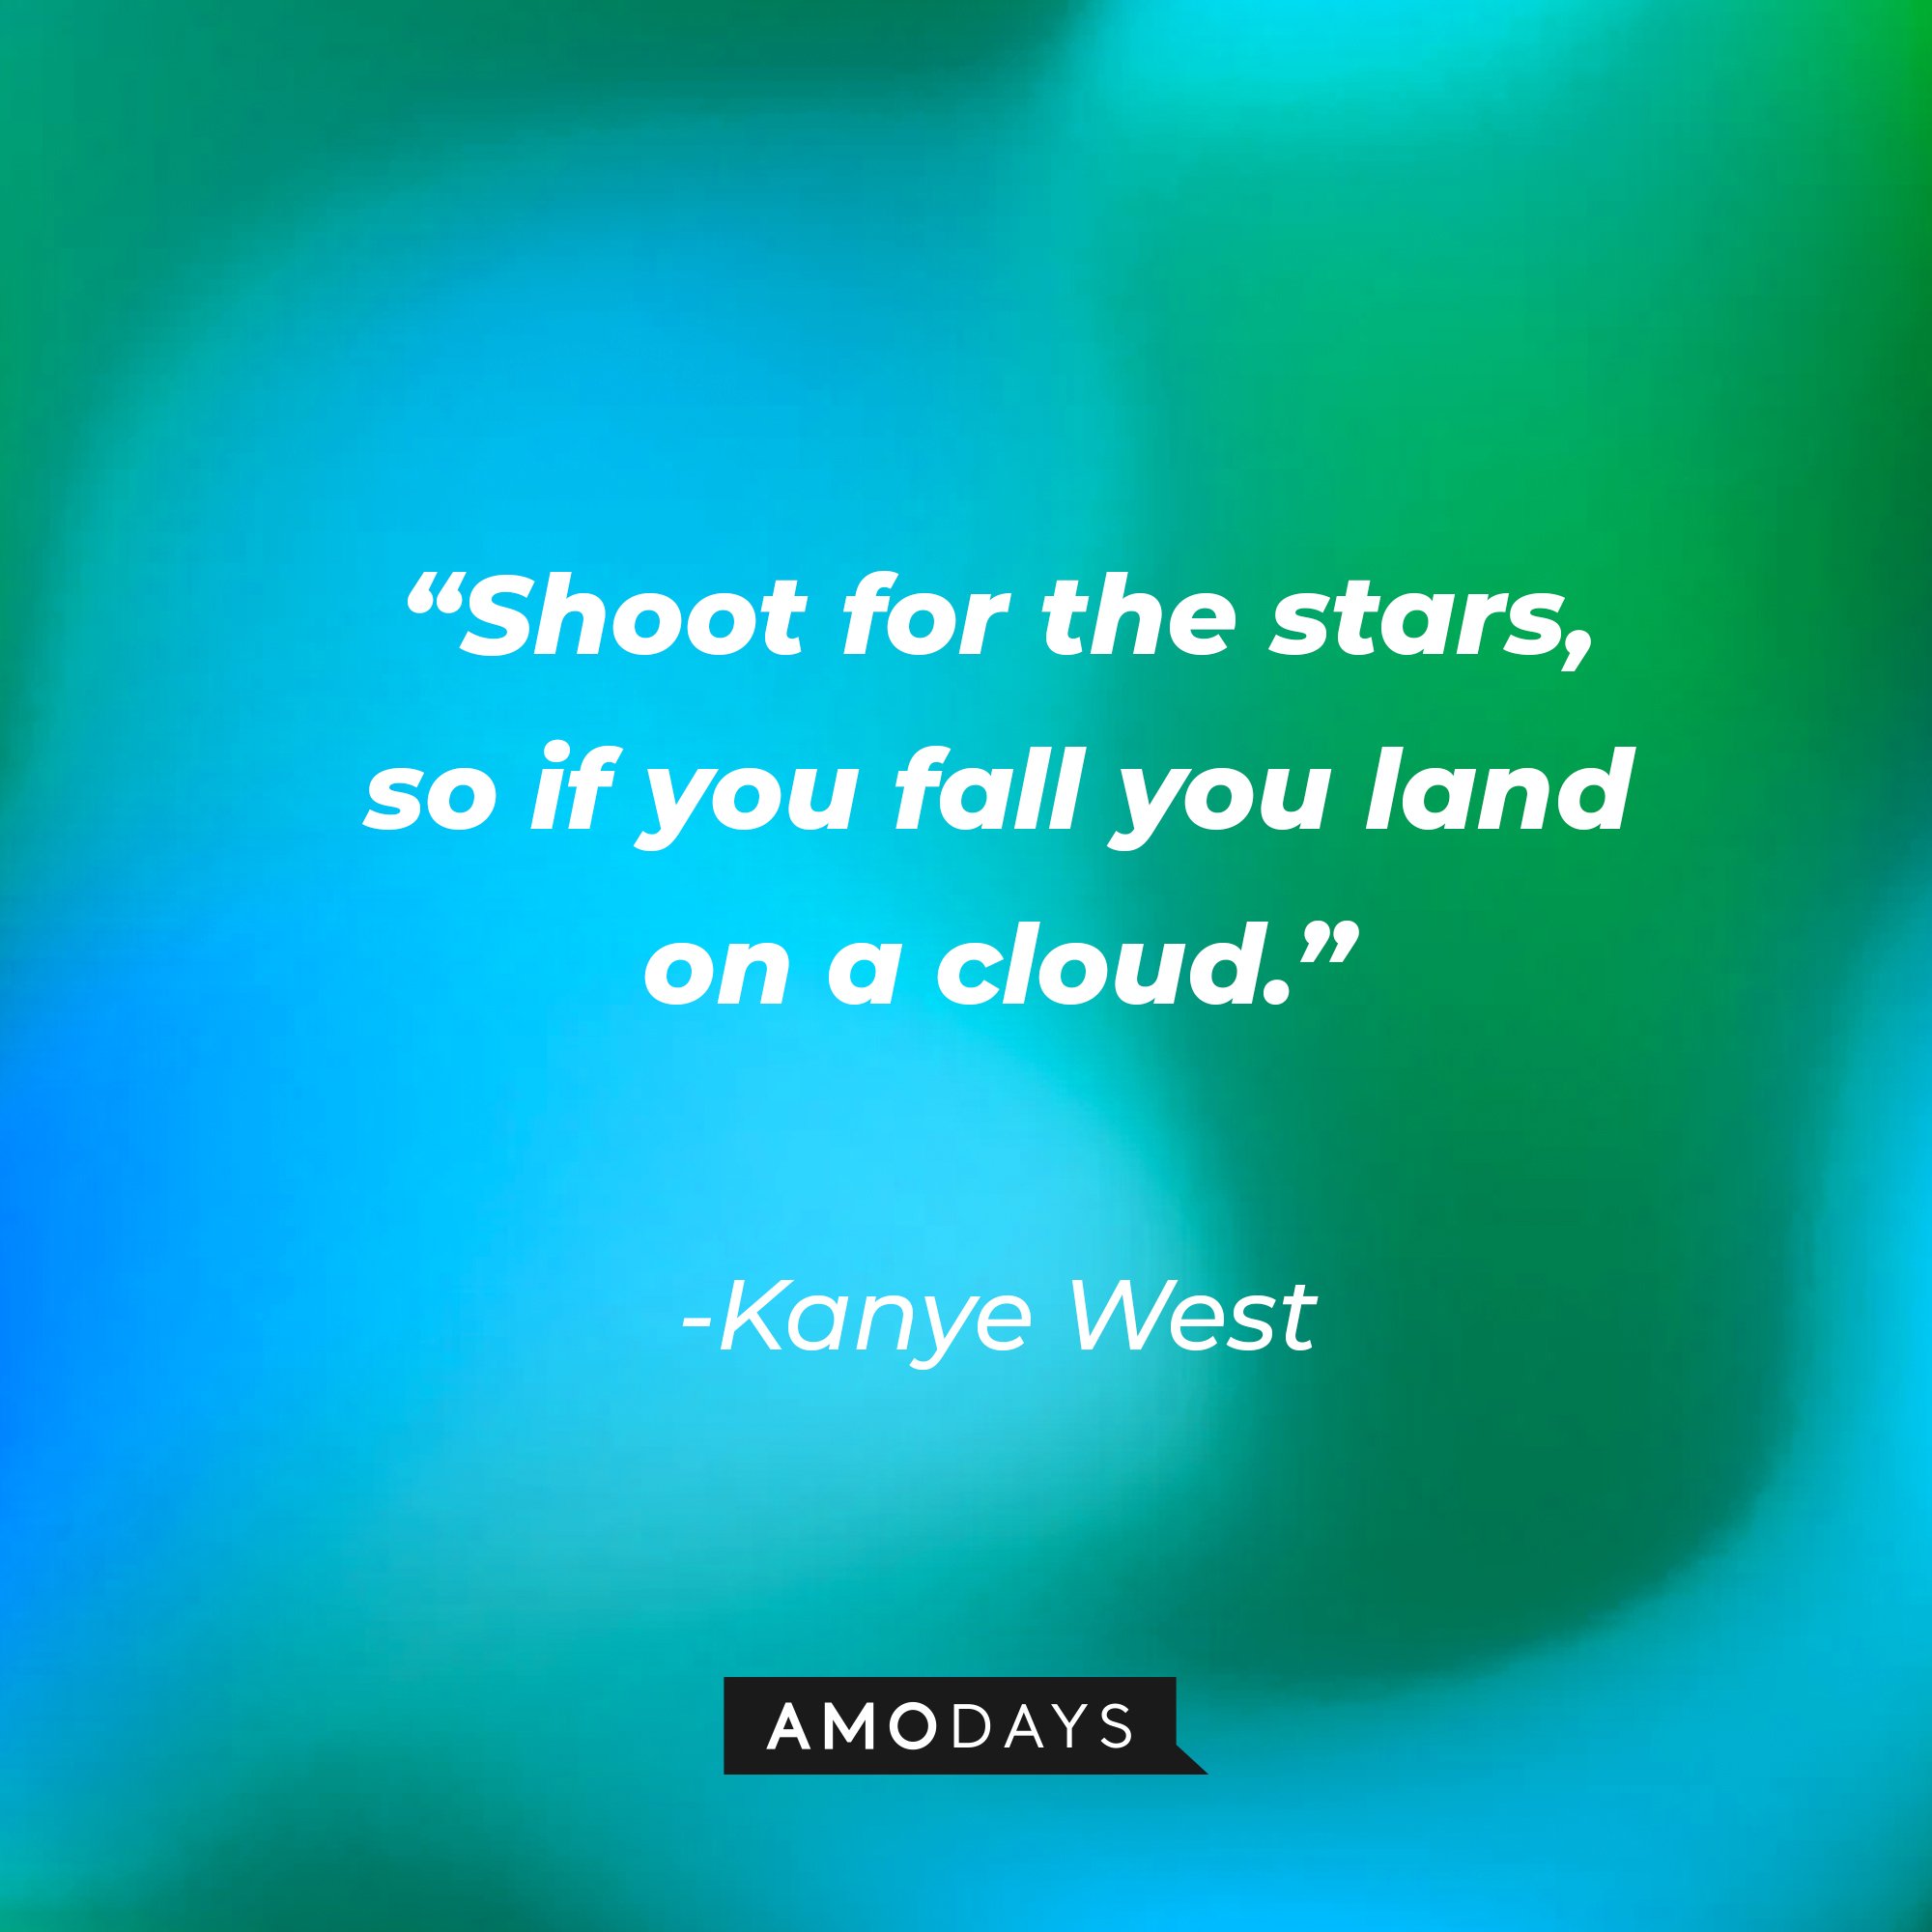 Kanye West quote: “Shoot for the stars, so if you fall you land on a cloud.” | Image: AmoDays